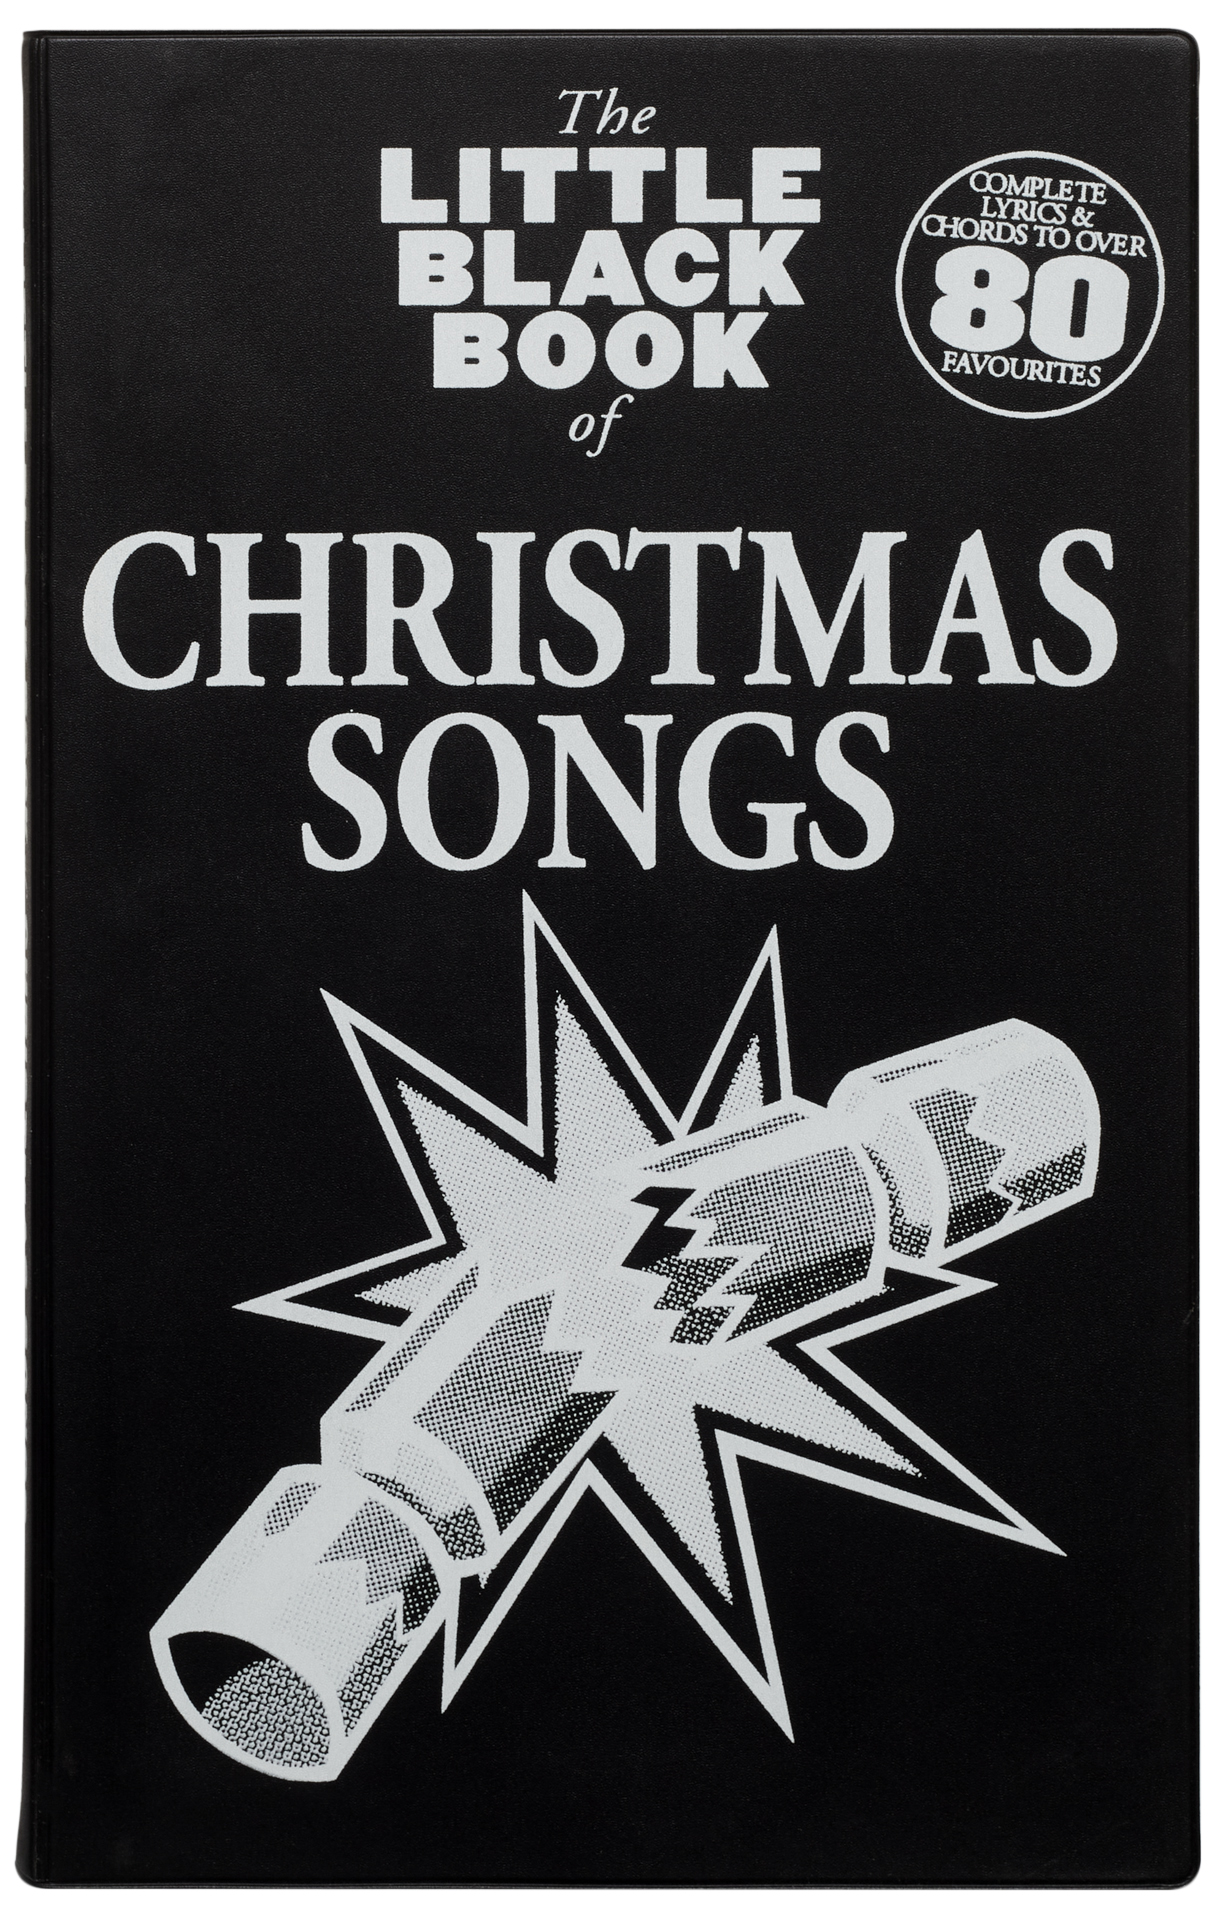 MS The Little Black Book Of Christmas Songs | Obrázok 1 | eplay.sk